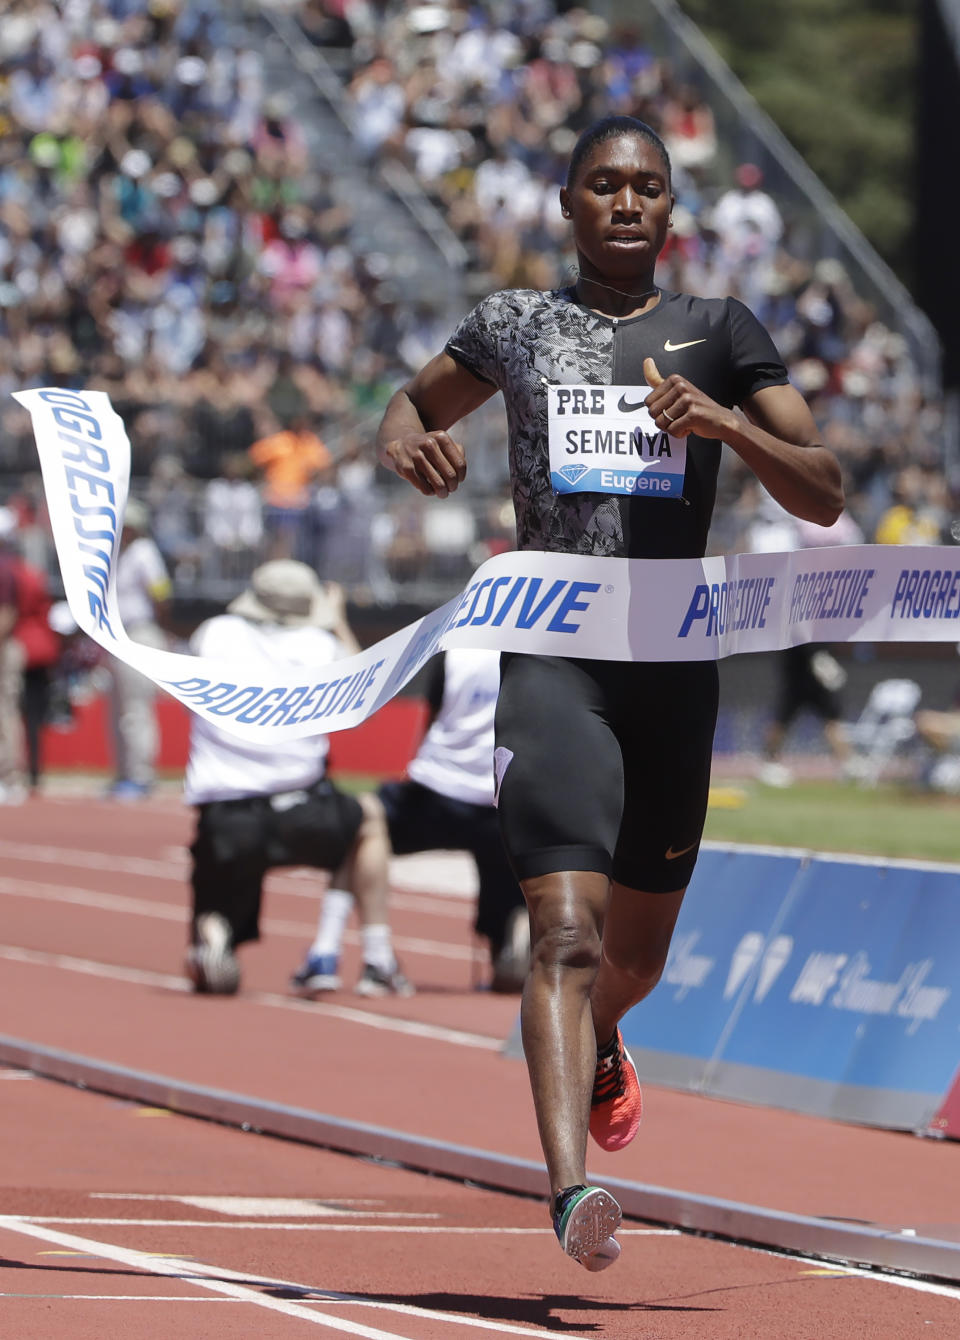 South Africa's Caster Semenya crosses the finish line to win the women's 800-meter race during the Prefontaine Classic, an IAAF Diamond League athletics meeting, in Stanford, Calif., Sunday, June 30, 2019. (AP Photo/Jeff Chiu)